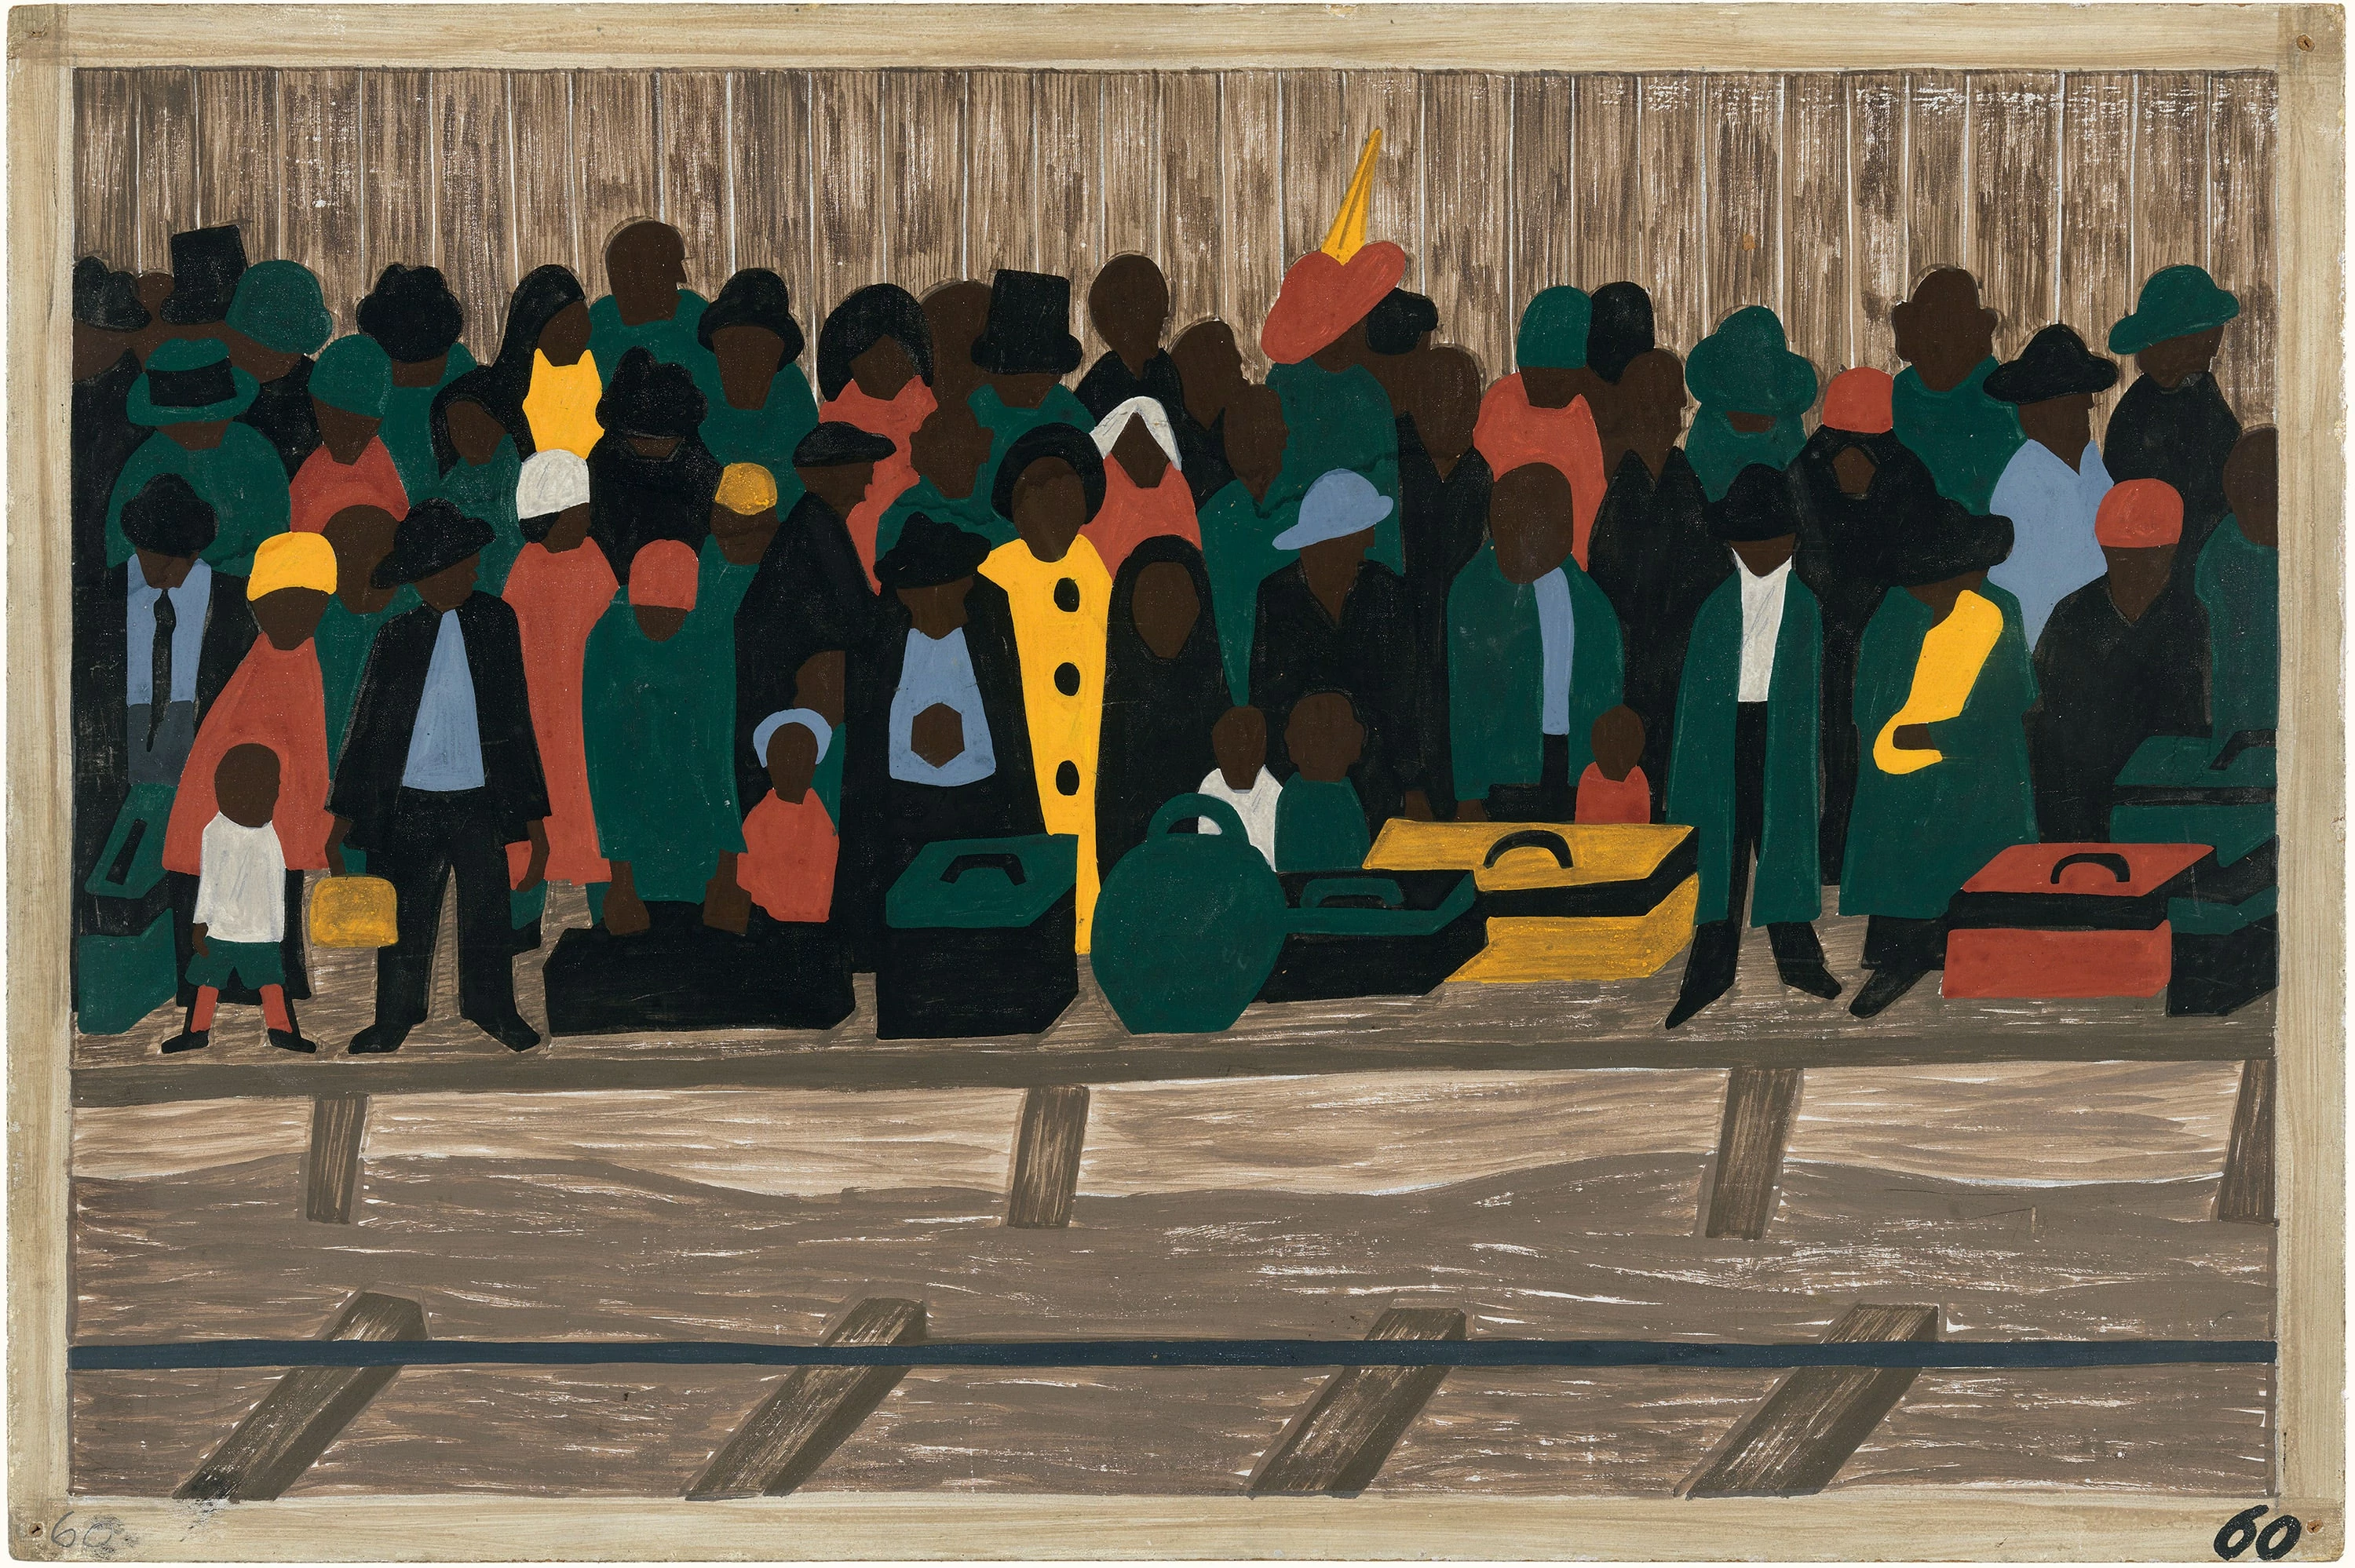 Migration Series No.60: And the migrants kept coming, Jacob Lawrence